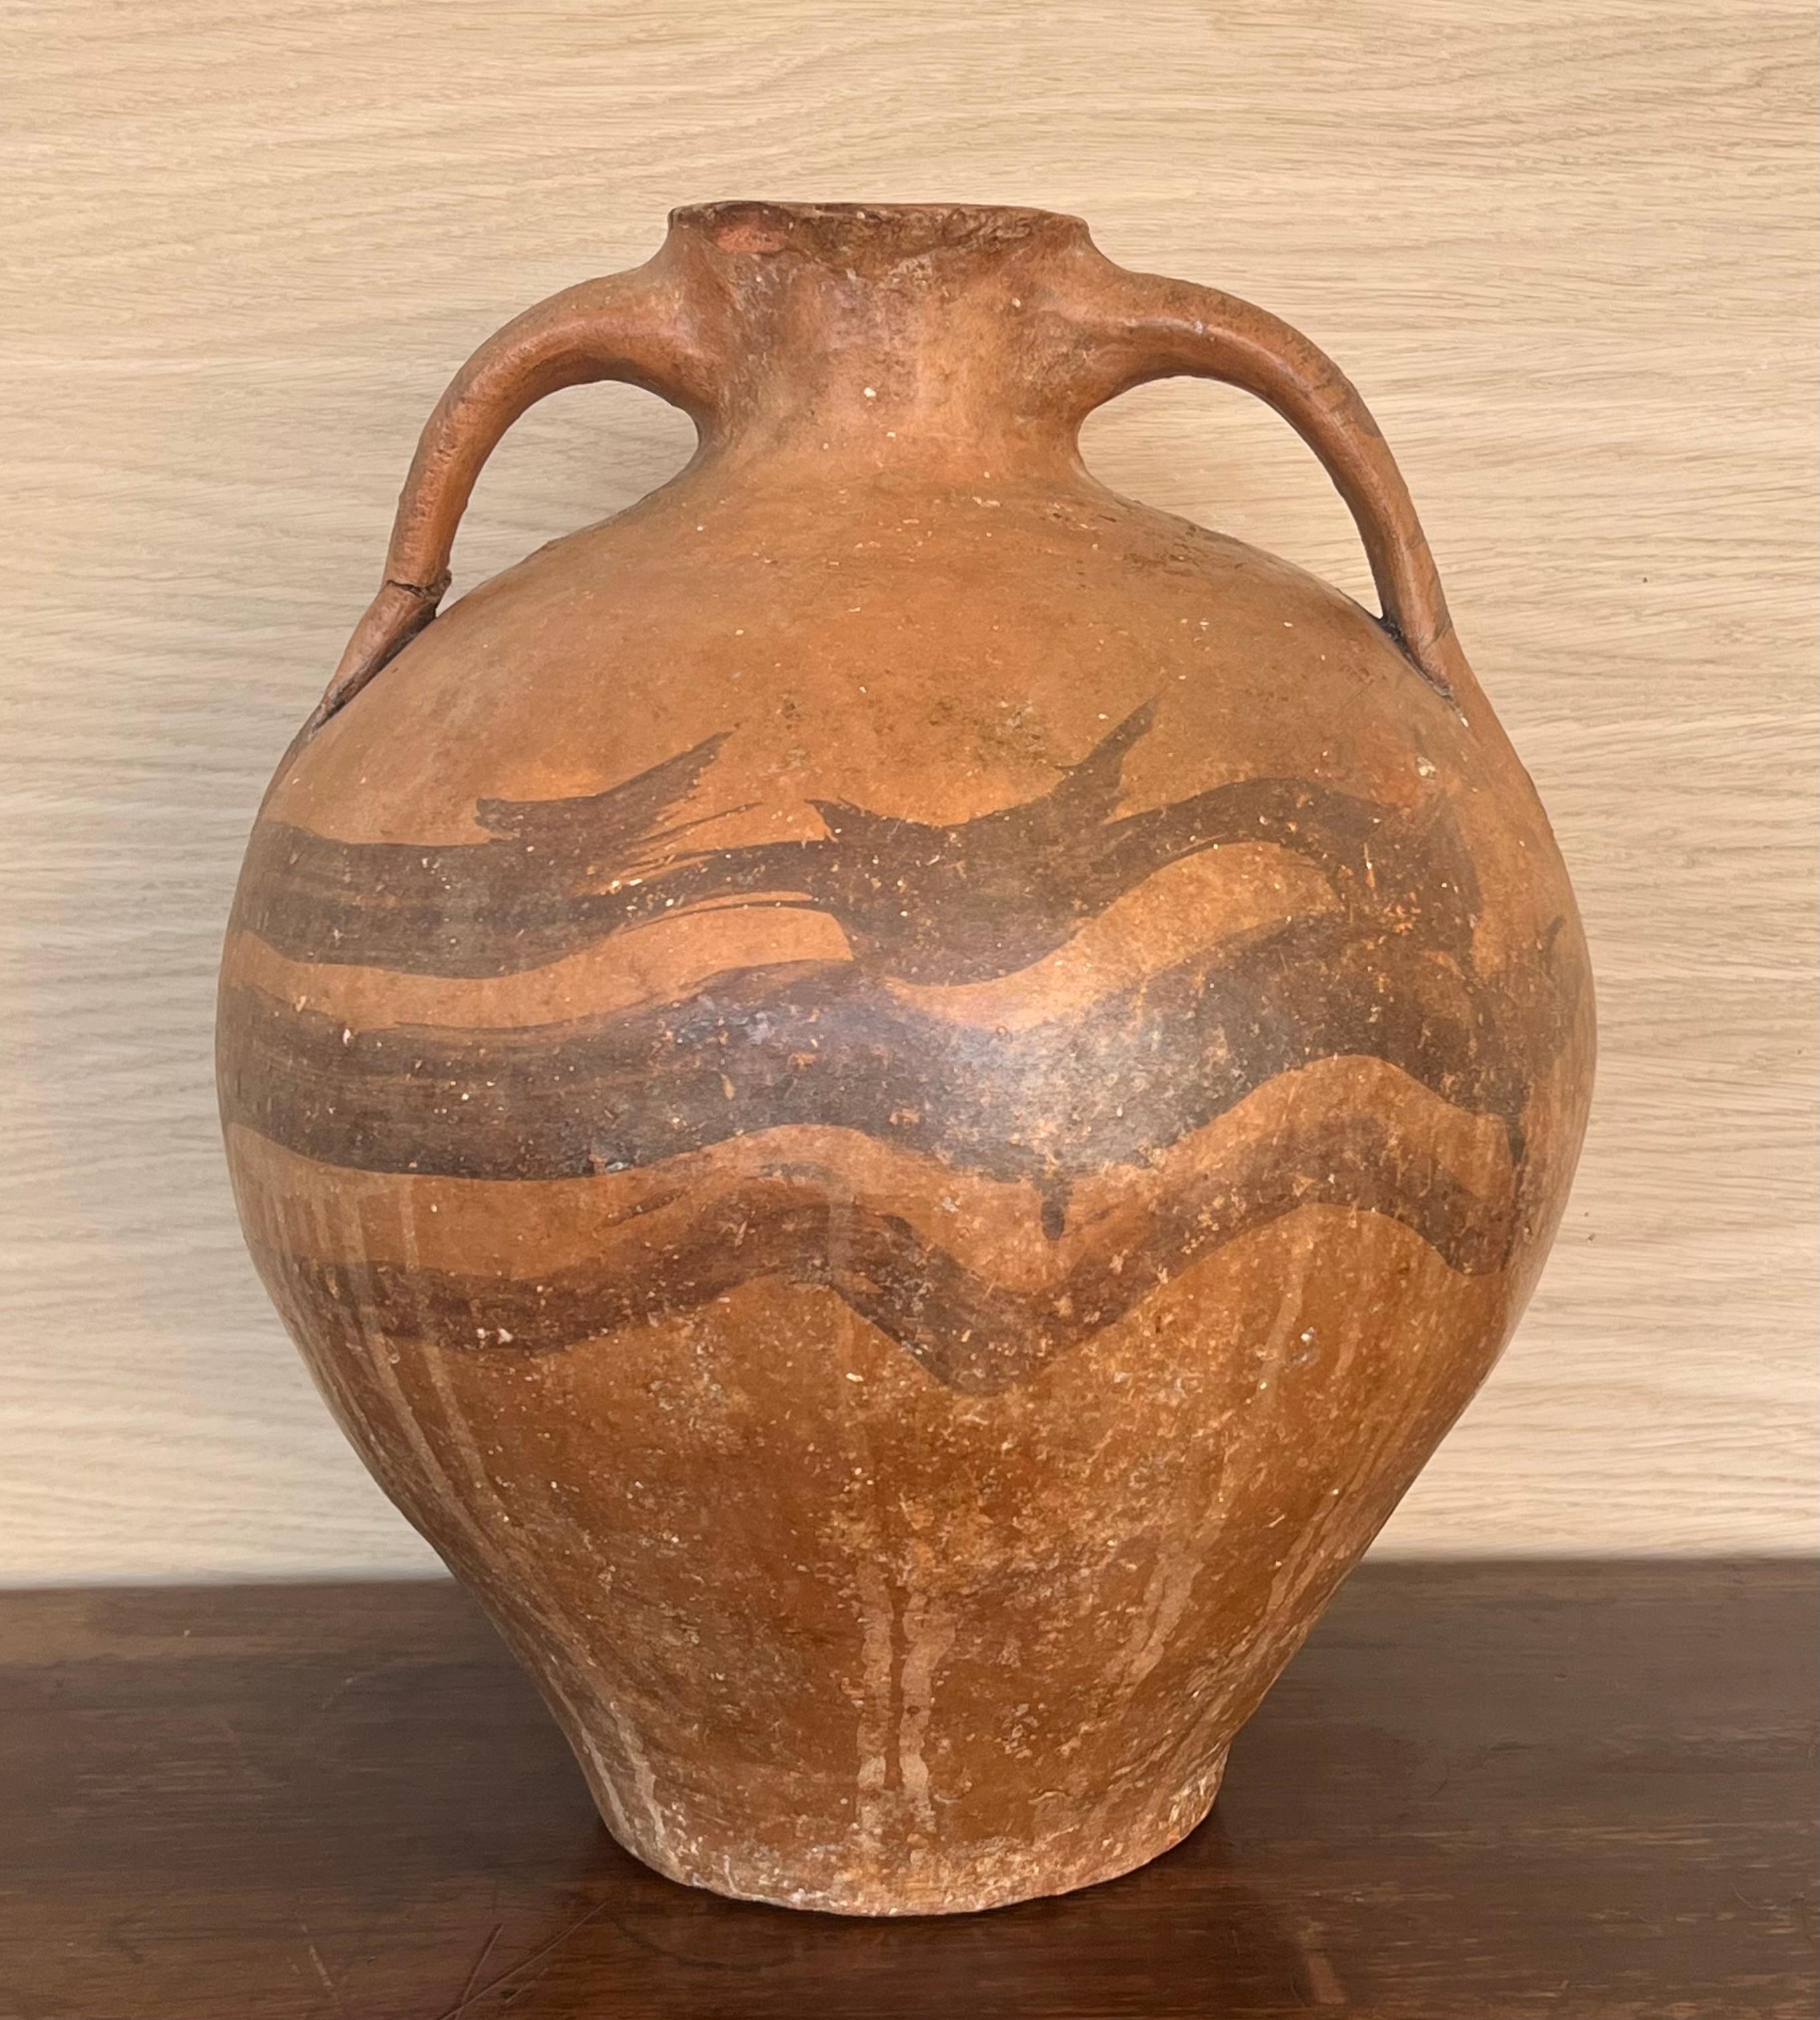 Rare red pitcher ‘cantaro’ from Calanda, Aragon-Zaragoza area of Spain, circa 1750 a rare piece from a Private collection. Other examples can be seen in the Museo de Zaragoza.
With gorgeous original patina, this jar features the characteristic